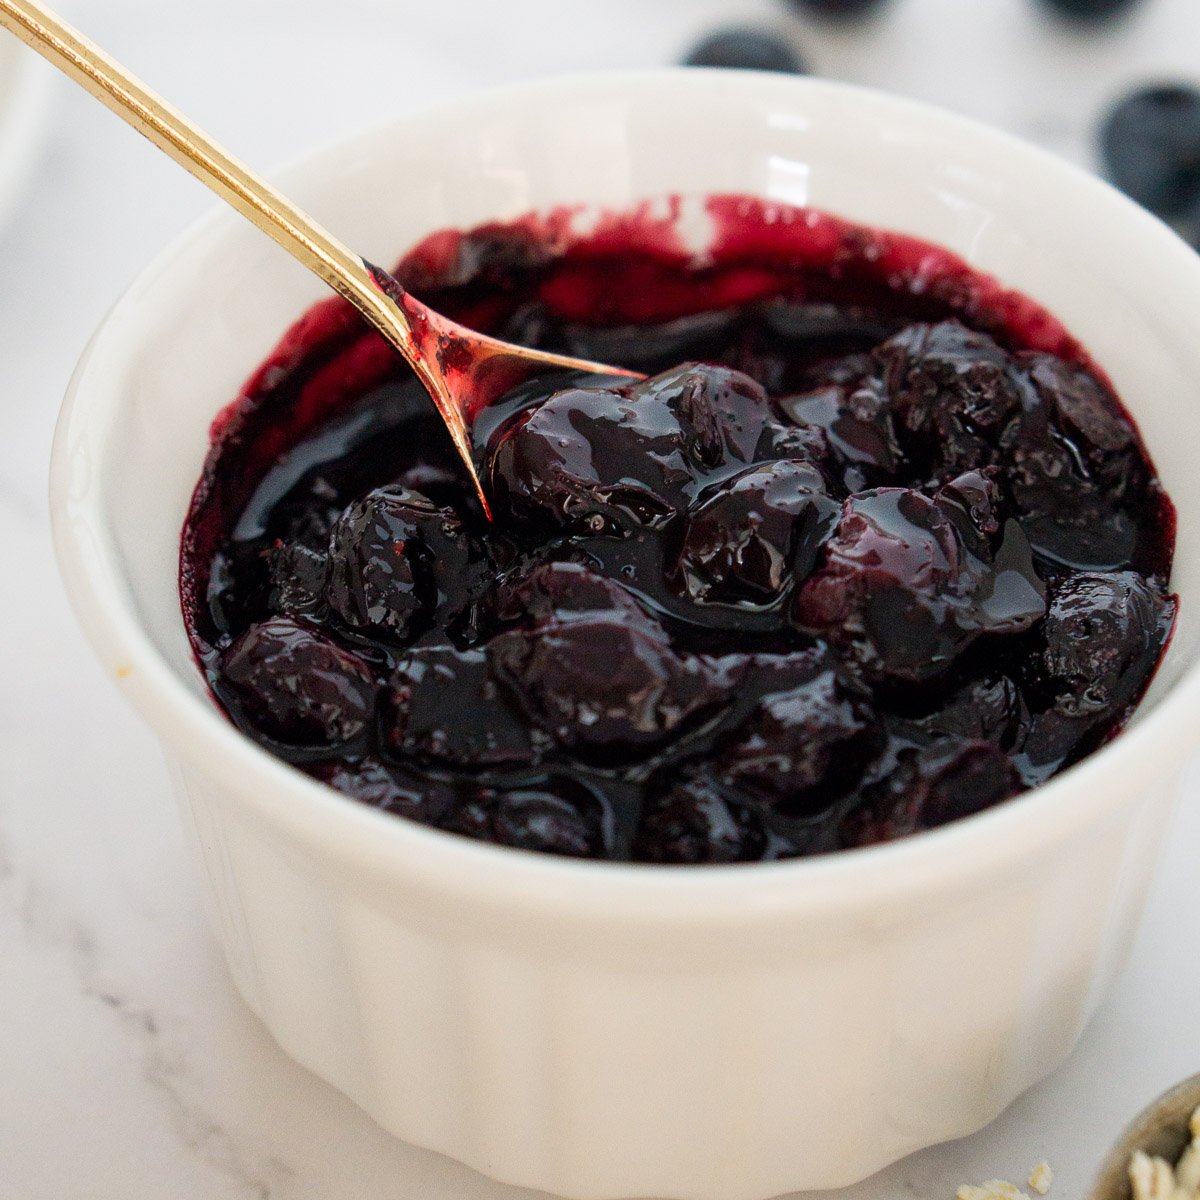 Blueberry sauce for blueberry Moscow Mules